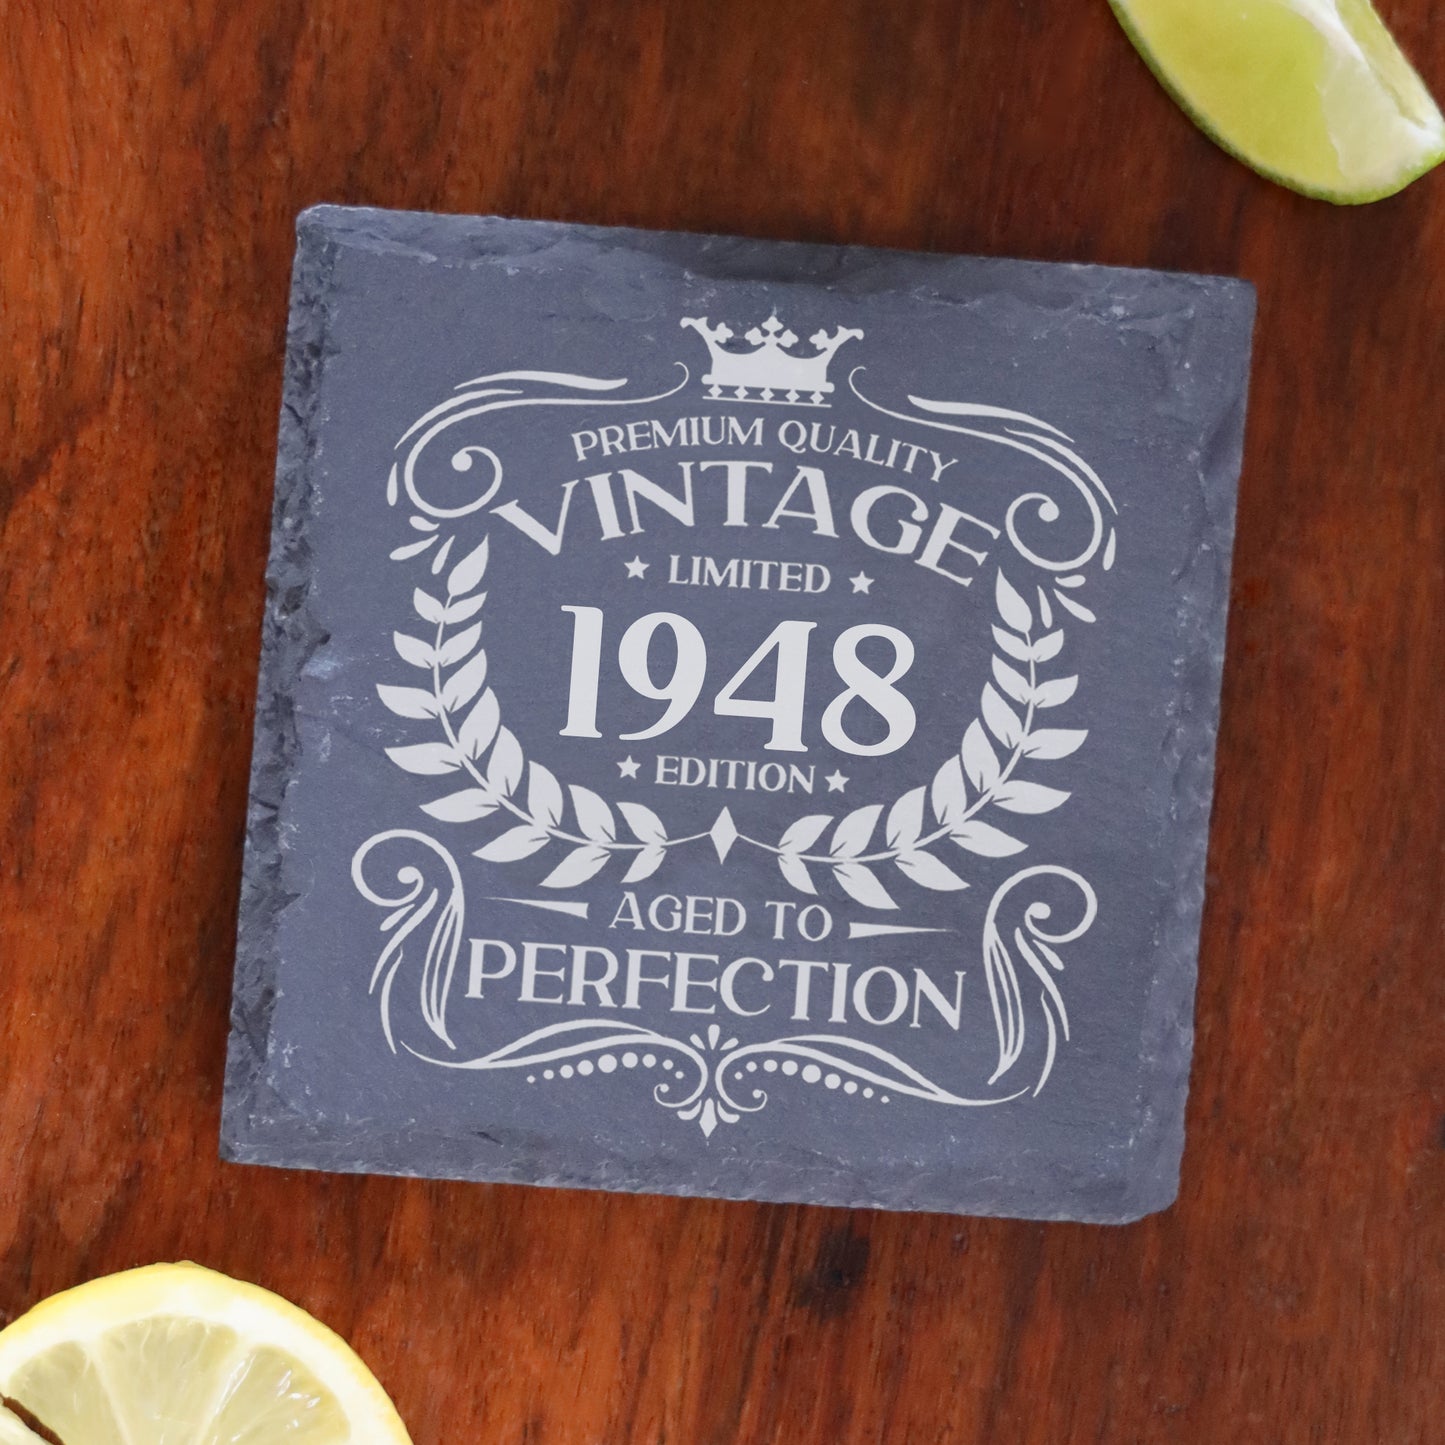 Personalised Vintage 1948 Mug and/or Coaster  - Always Looking Good - Square Coaster On Its Own  